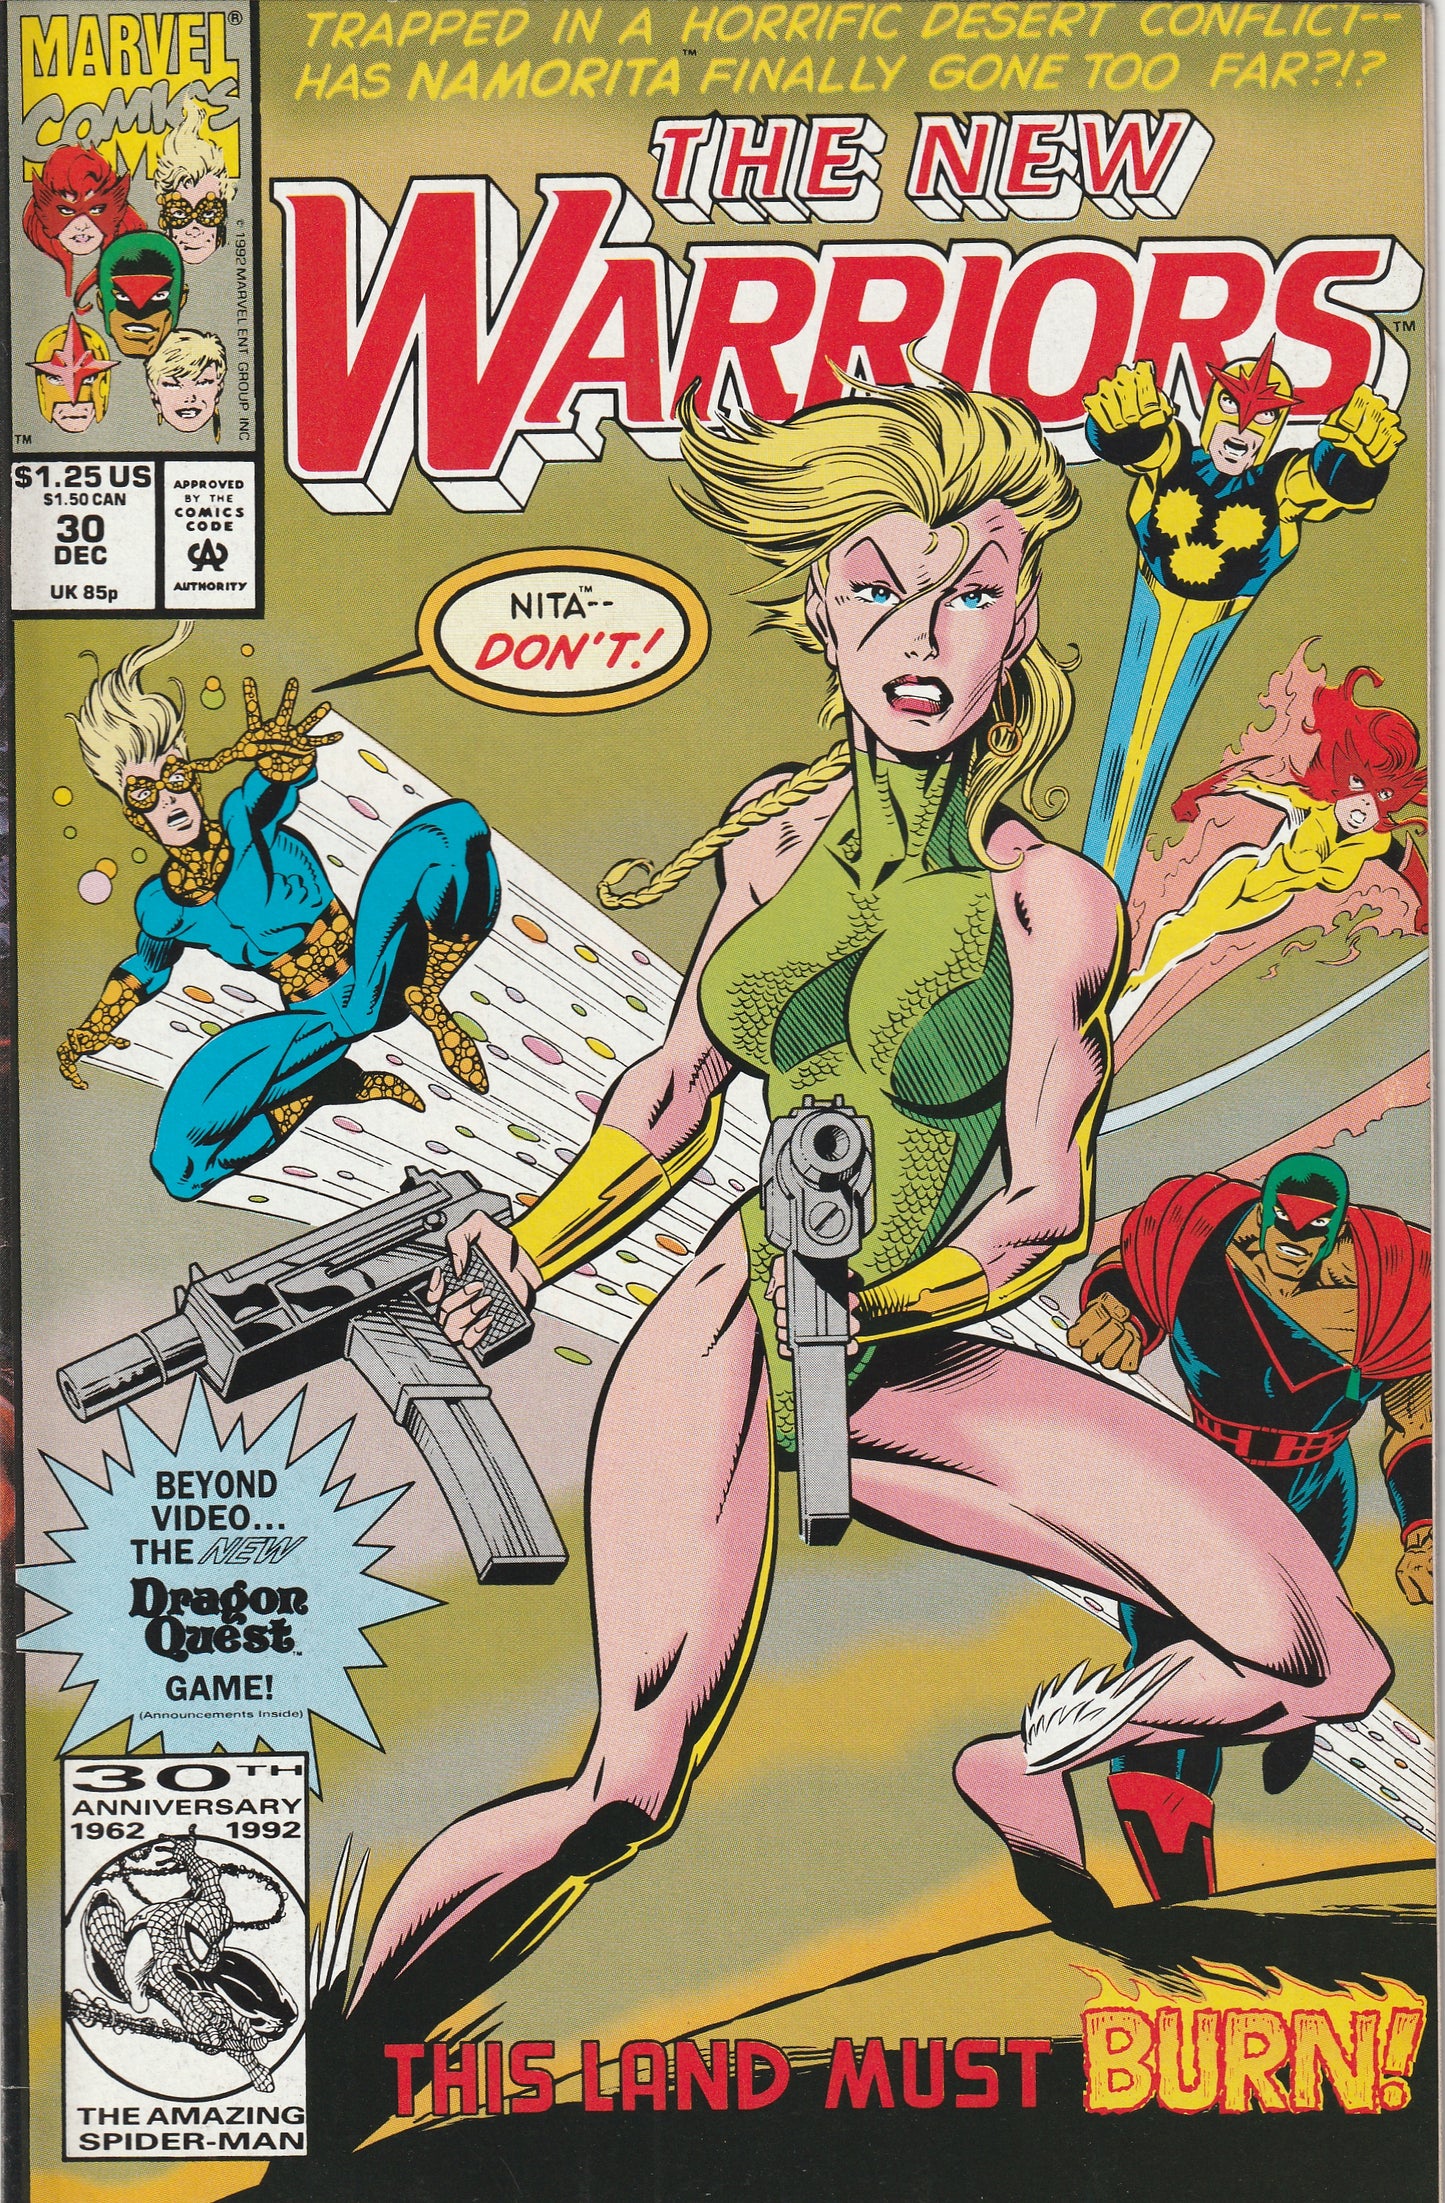 The New Warriors #30 (1992)